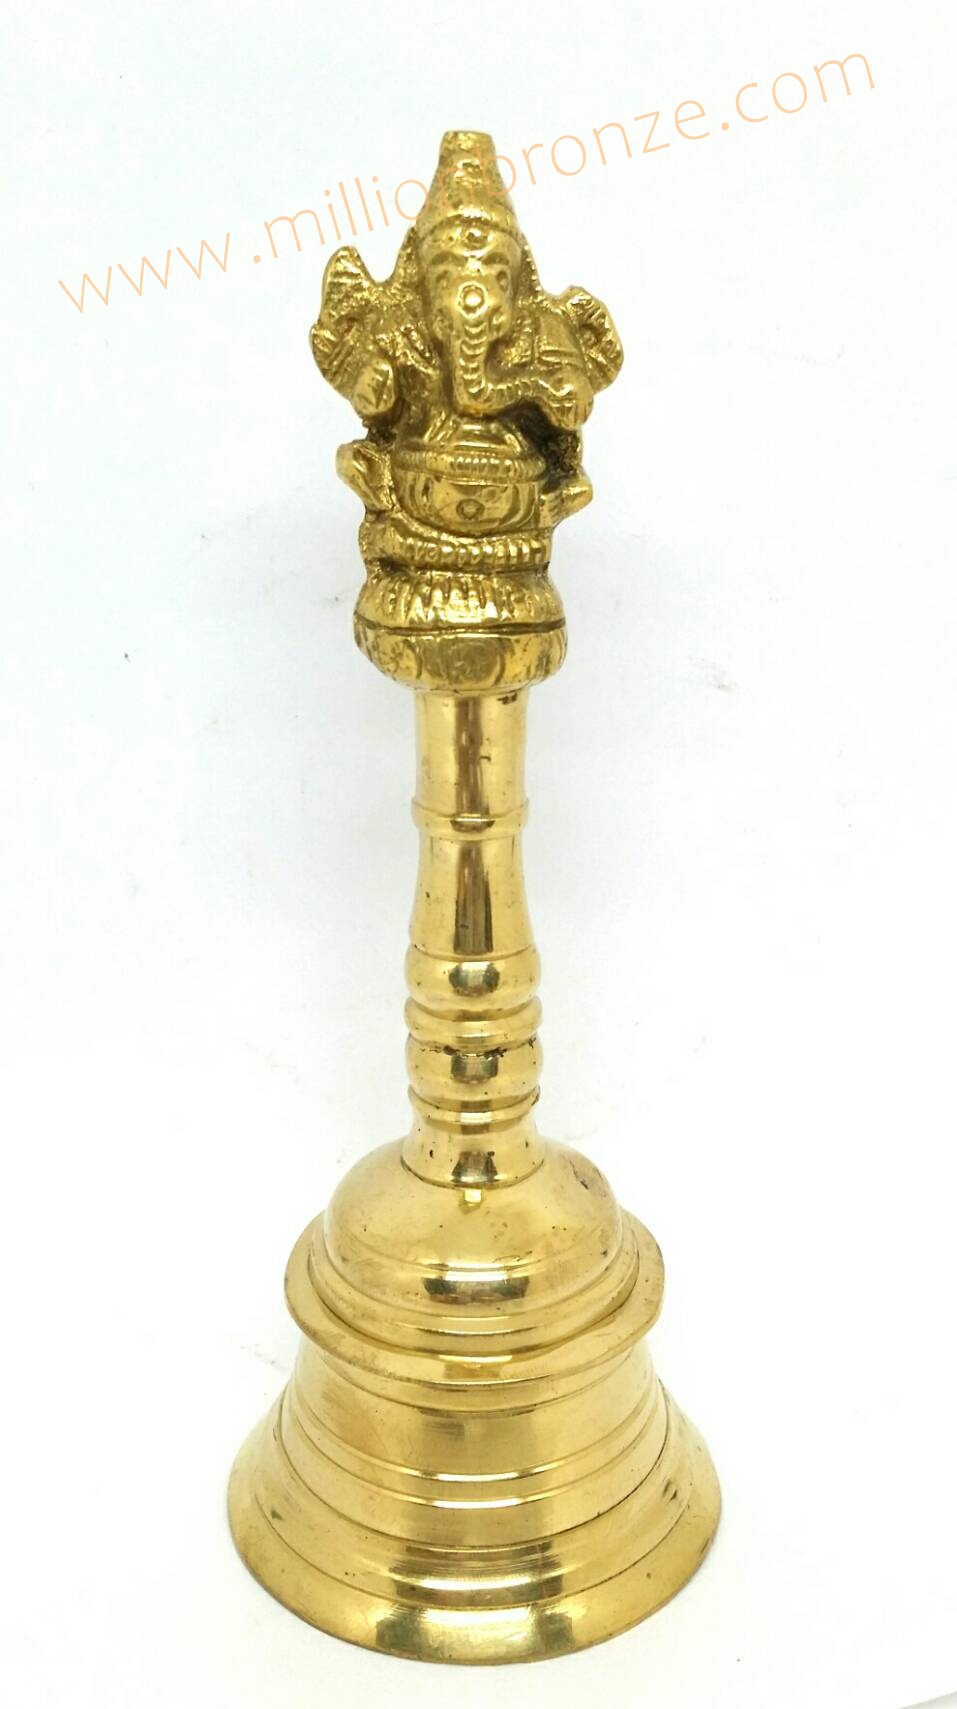 ٻҾ3 ͧԹ : HB023 д觷ͧͧ Թ ҧ 2.5  Bronze Bell from India